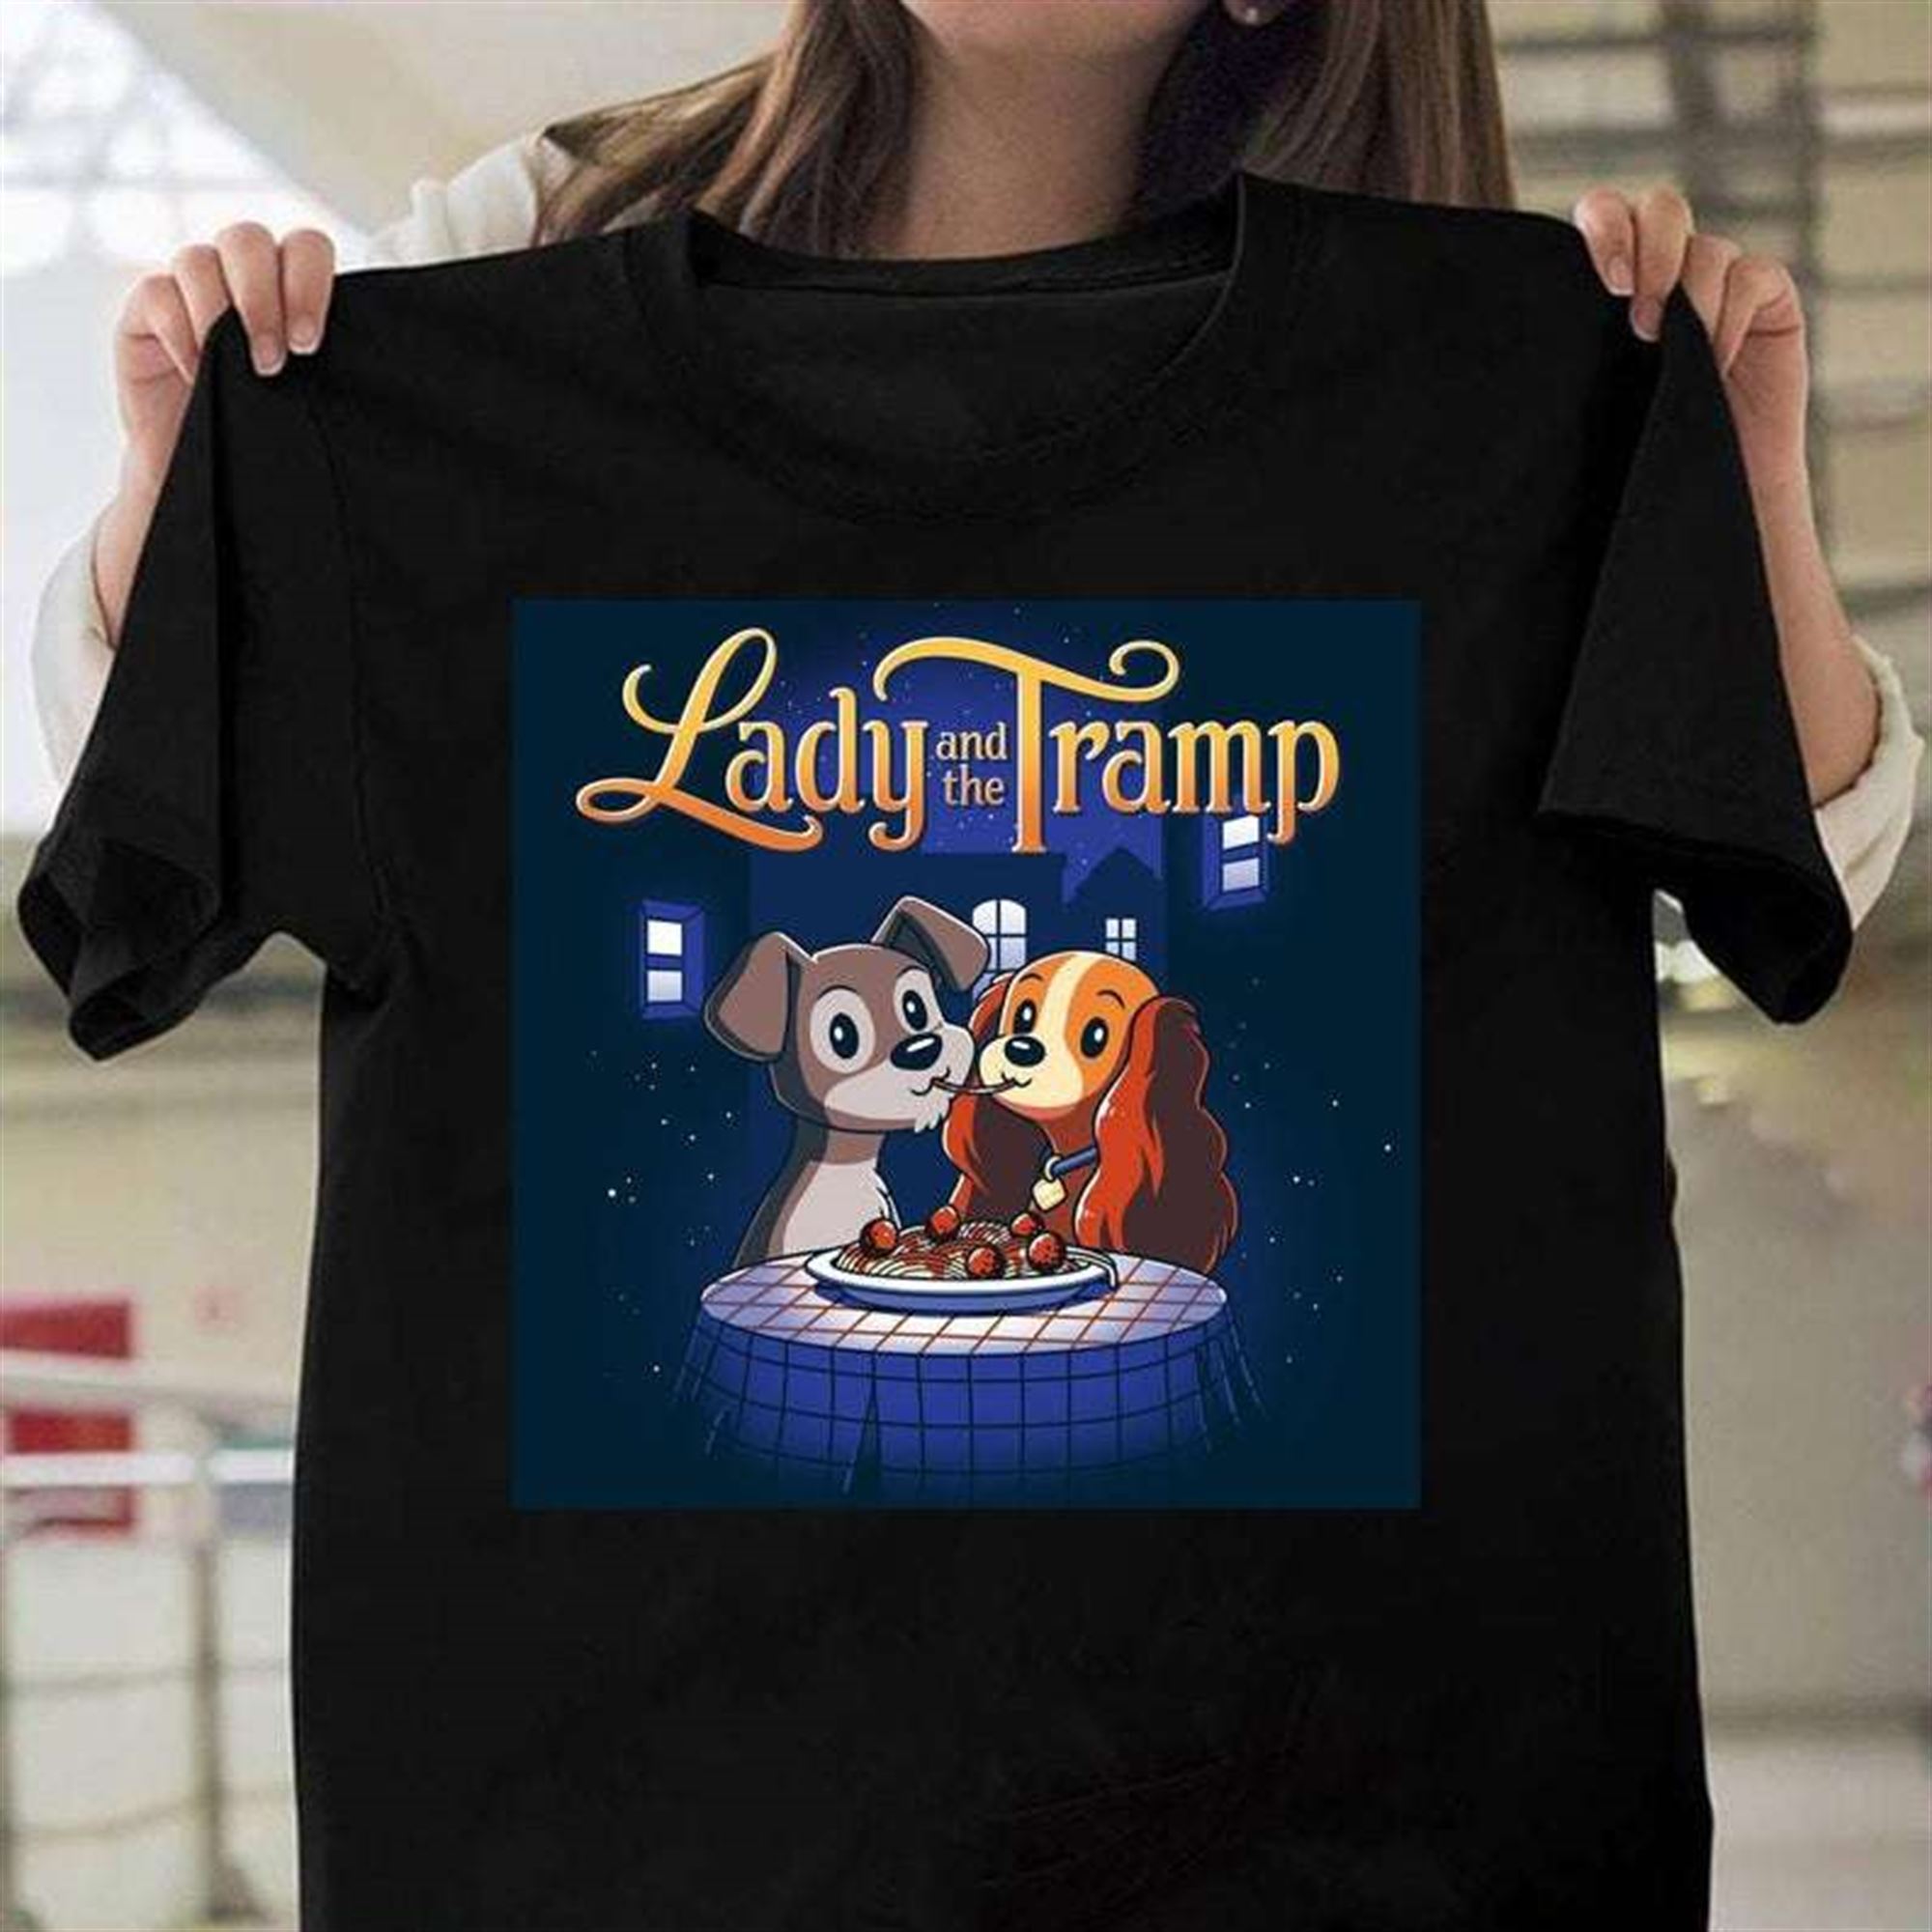 Lady And The Tramp Disney T Shirt Size Up To 5xl